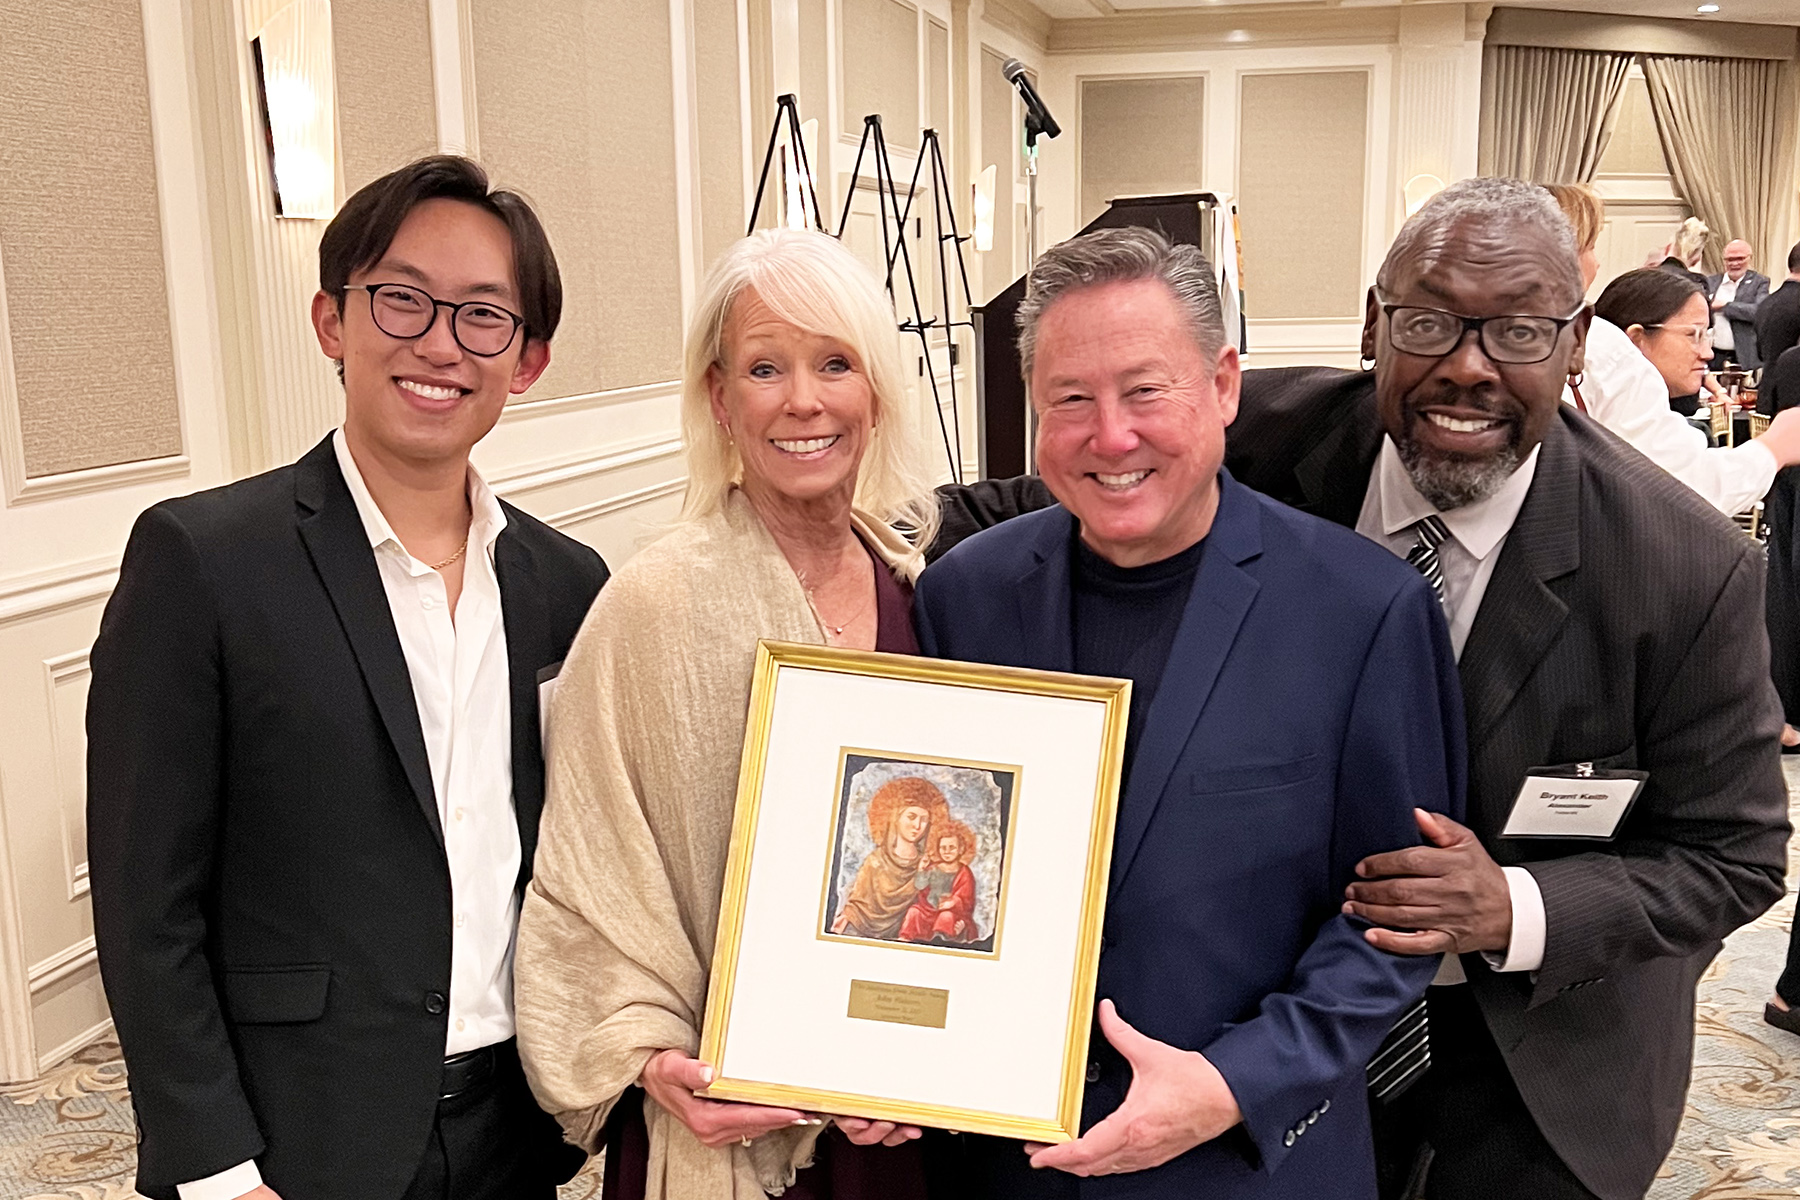 Pictured left to right: Jeremy Lee, assistant director of choral activities, John's wife Kathleen, John Flaherty, and Bryant Keith Alexander, CFA dean